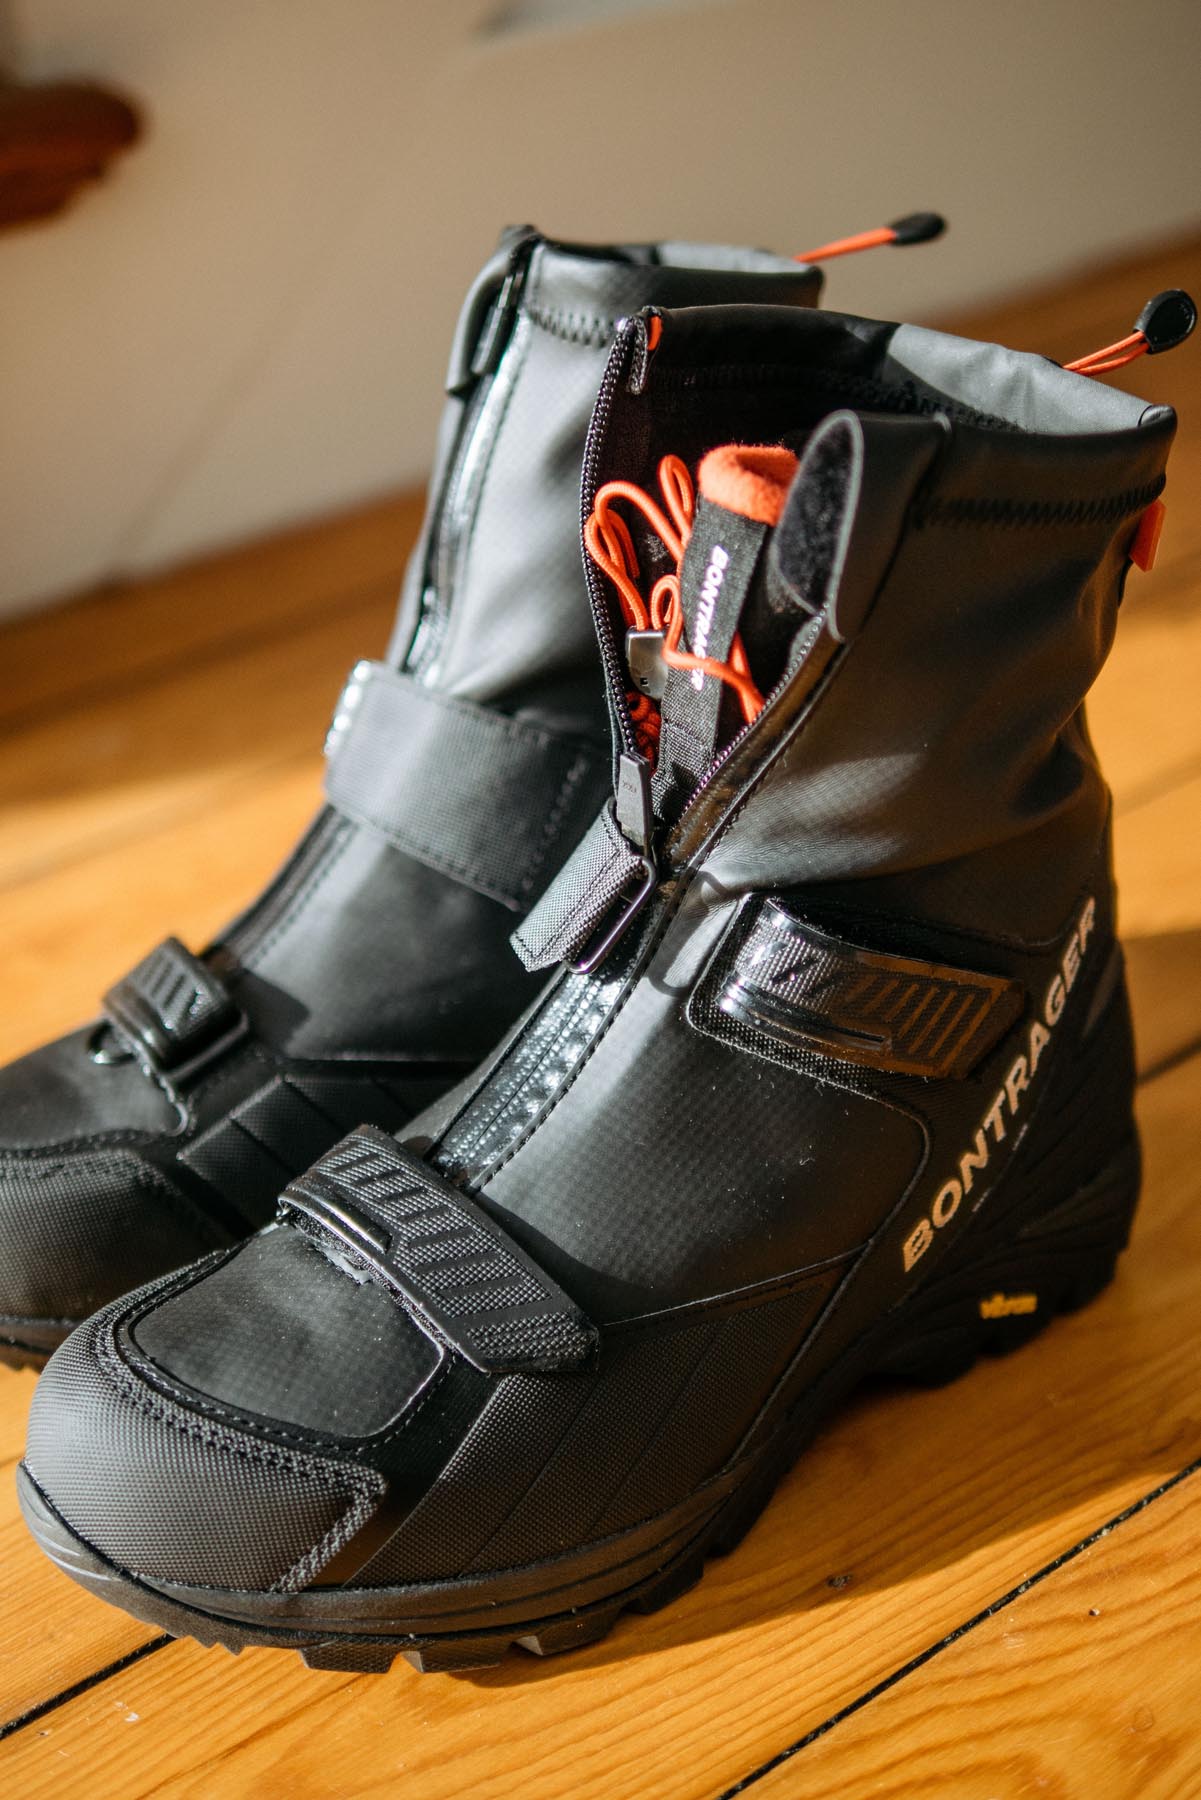 bontrager winter cycling shoes